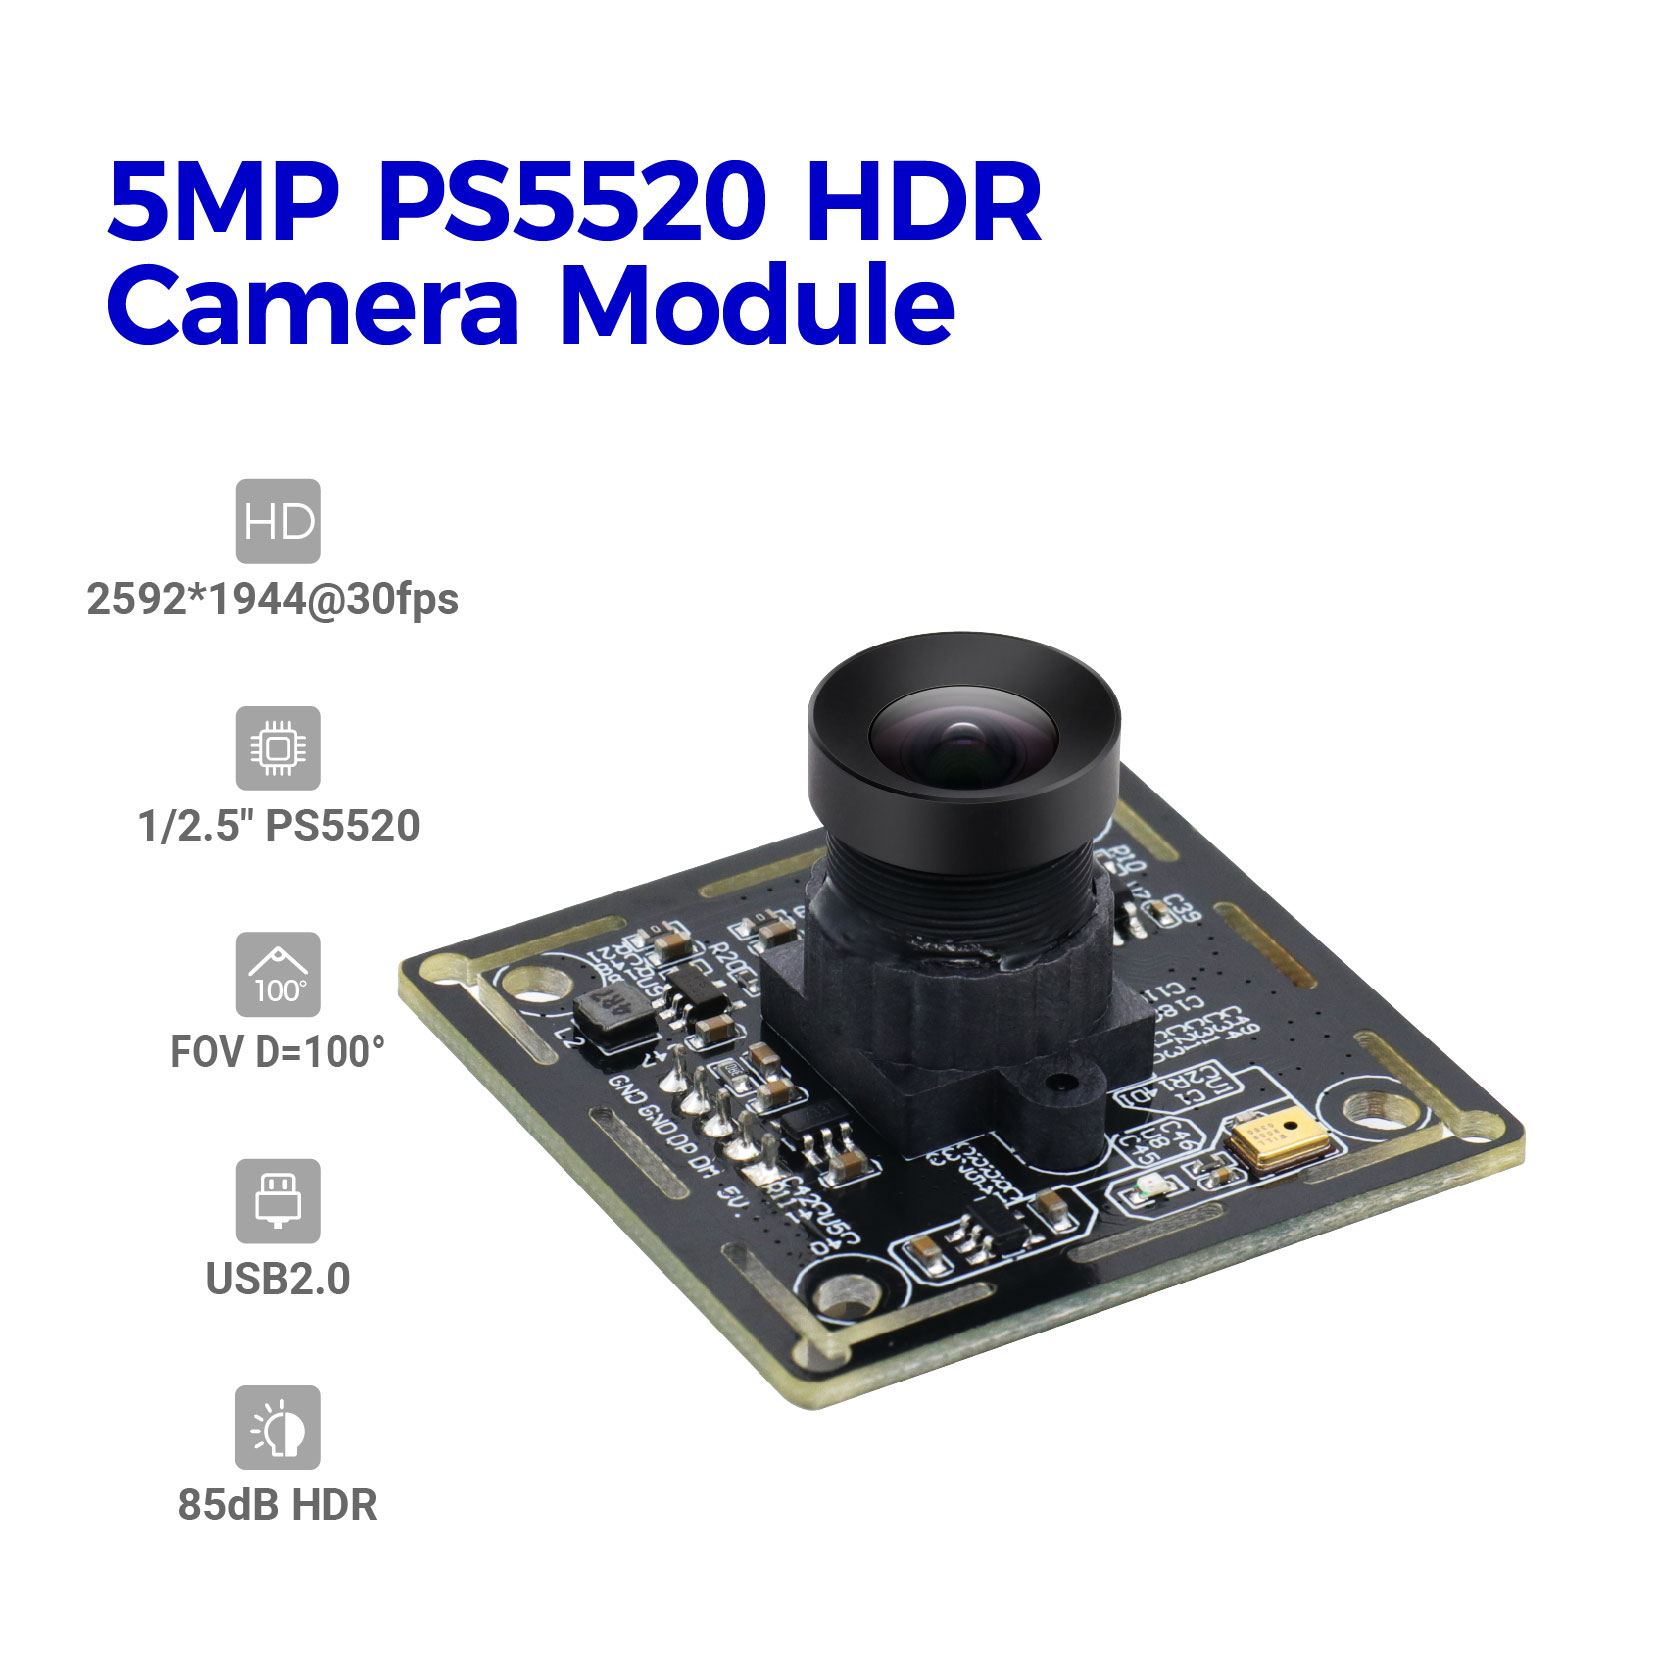 Customized High Quality 5MP PS5520 HDR Camera Module